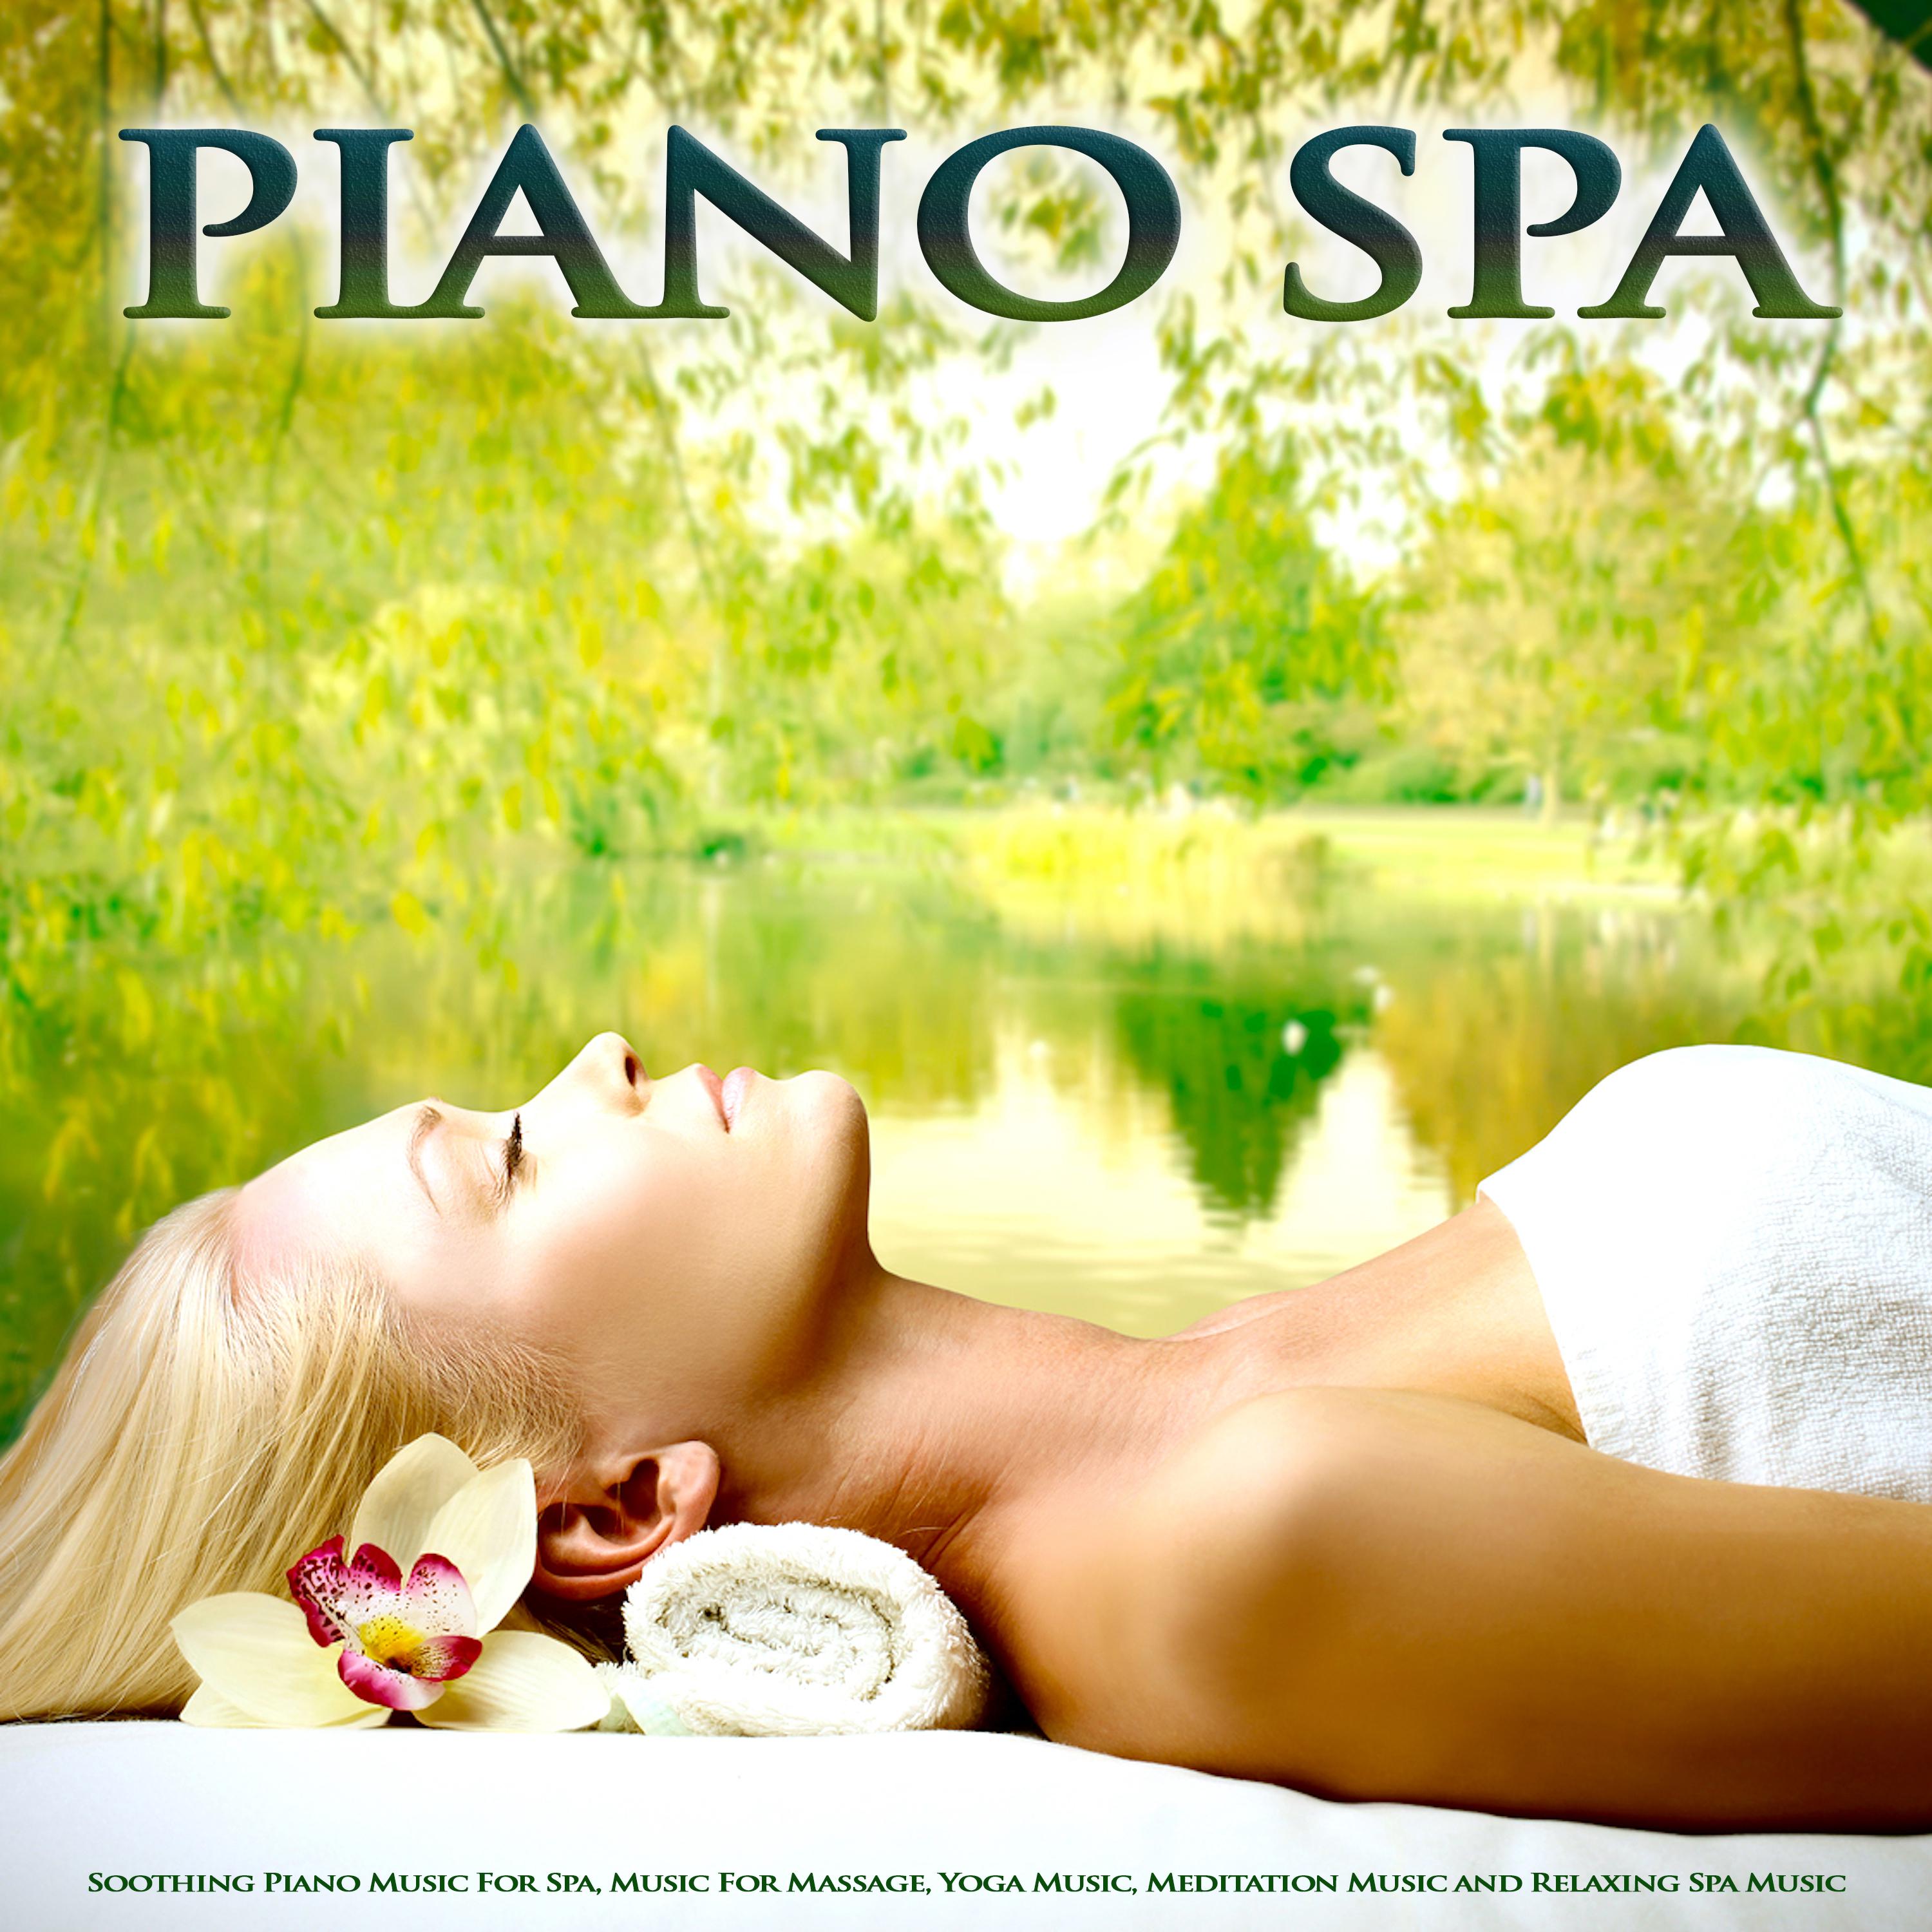 Piano Spa: Soothing Piano Music For Spa, Music For Massage, Yoga Music, Meditation Music and Relaxing Spa Music